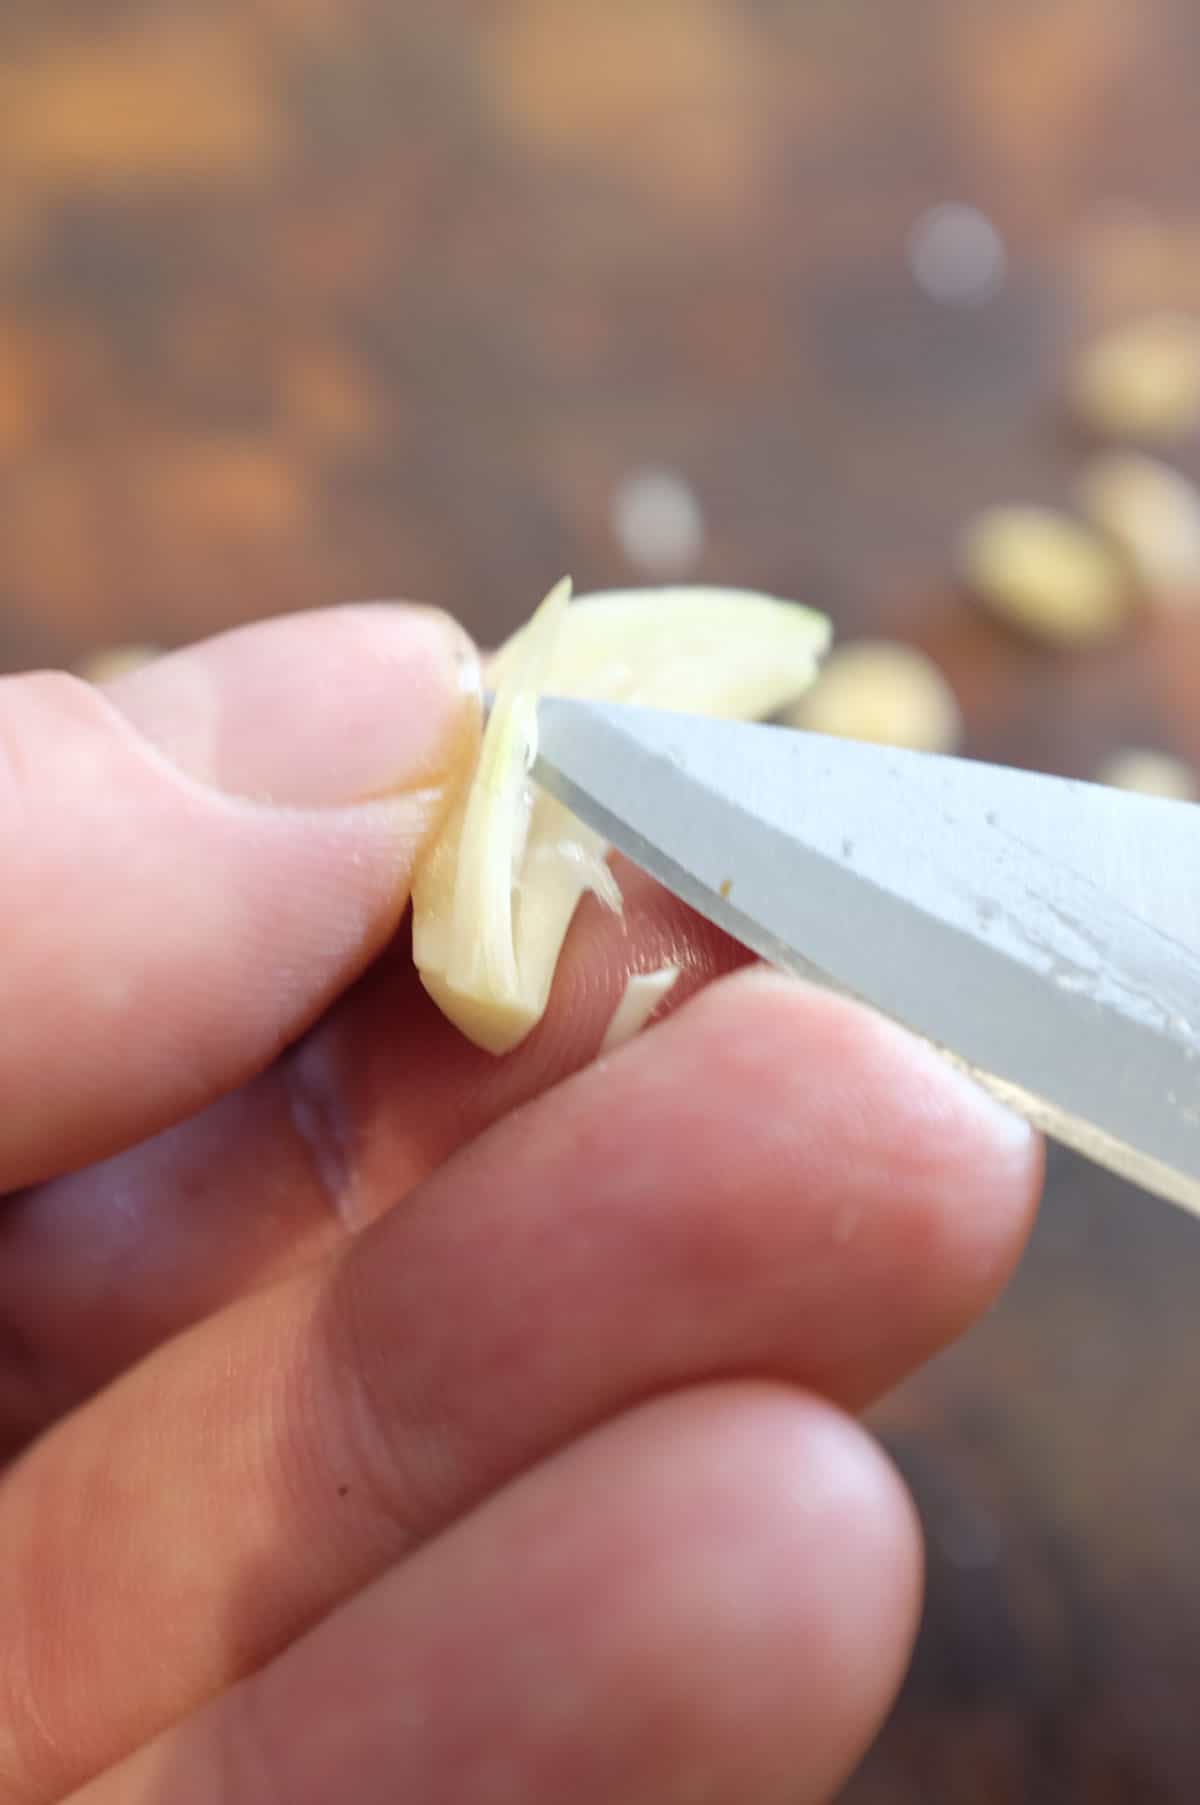 Removing the centre 'germs' of a garlic clove